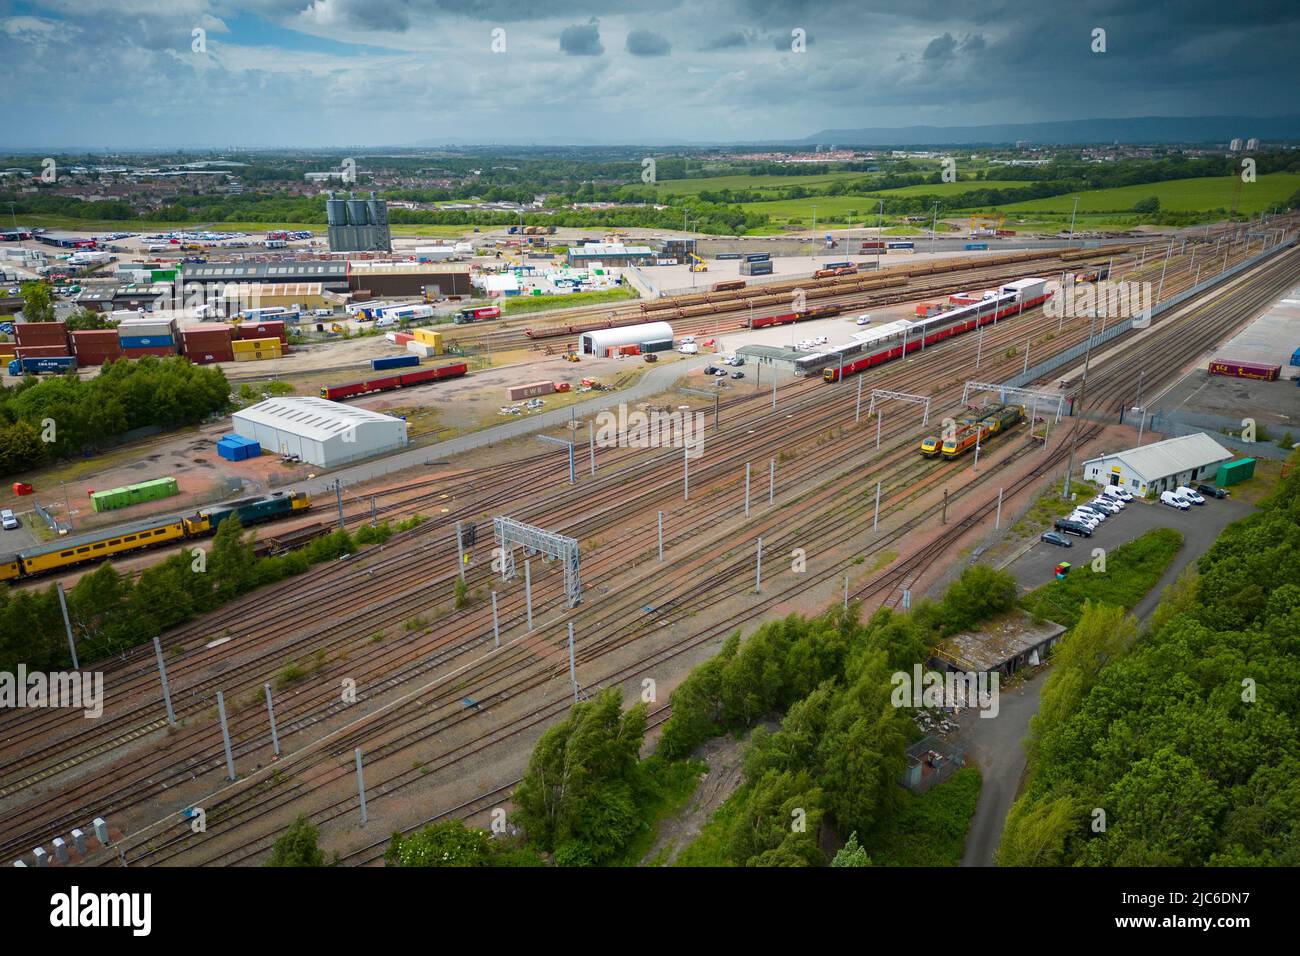 Bellshill, Scotland, UK. 10 June 2022. Aerial general view of  Mossend International Rail freight Park in Bellshill, North Lanarkshire. Mossend ( including Glasgow Airport and Clydeport) is part of the Clyde Green Freeport bid to become Scotland’s first two Green Freeports. The successful Freeports are expected to generate billions of pounds of investment and create thousands of jobs.  Iain Masterton/Alamy Live News Stock Photo